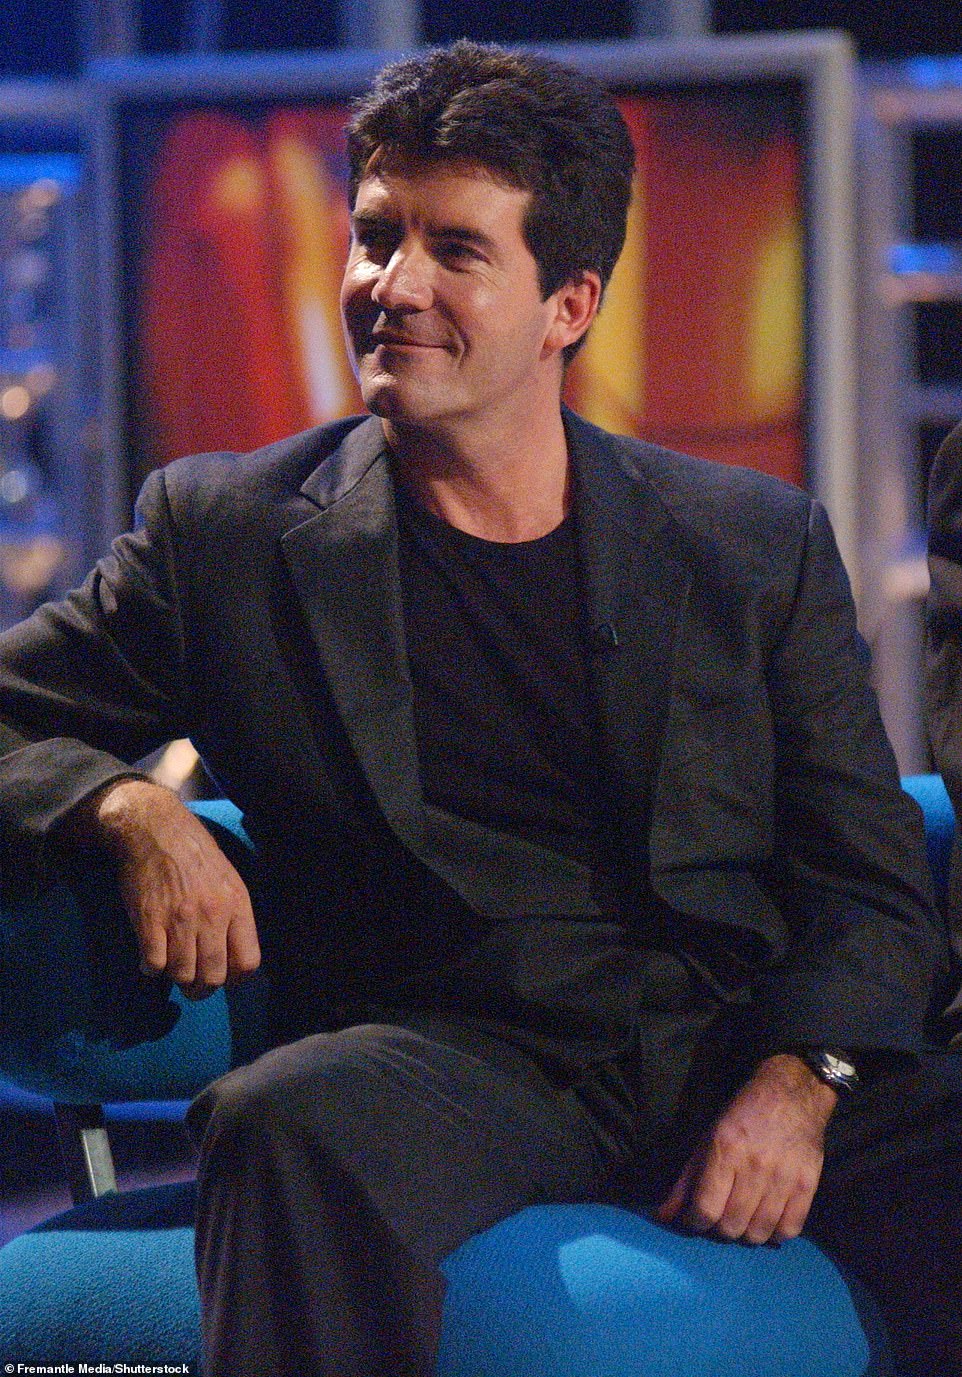 2001: Cowell looks dapper on Pop Idol, a prototype for The X Factor and the show that helped establish him as a household name.